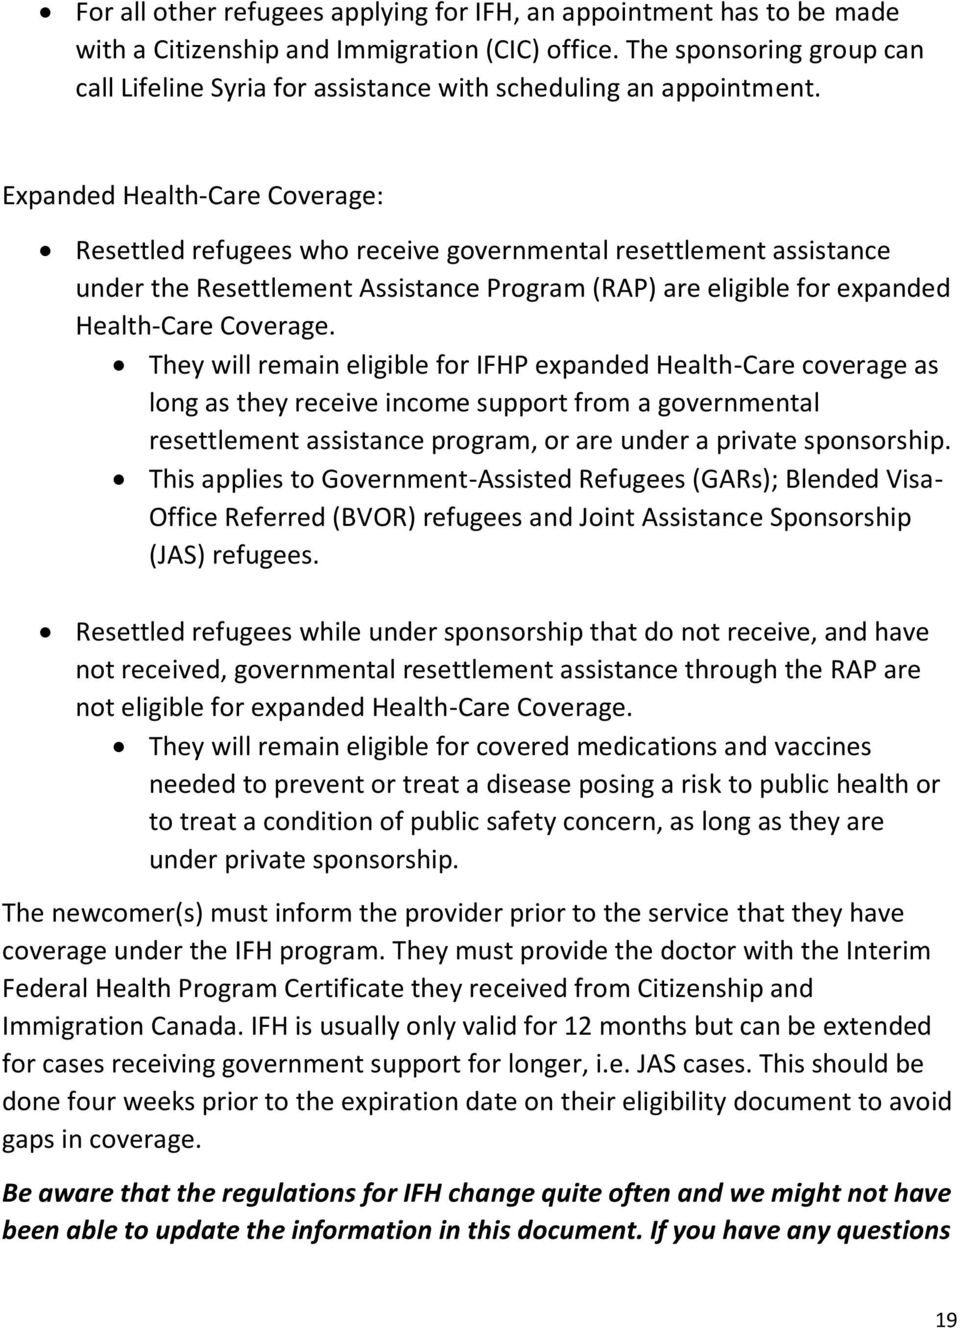 Expanded Health-Care Coverage: Resettled refugees who receive governmental resettlement assistance under the Resettlement Assistance Program (RAP) are eligible for expanded Health-Care Coverage.